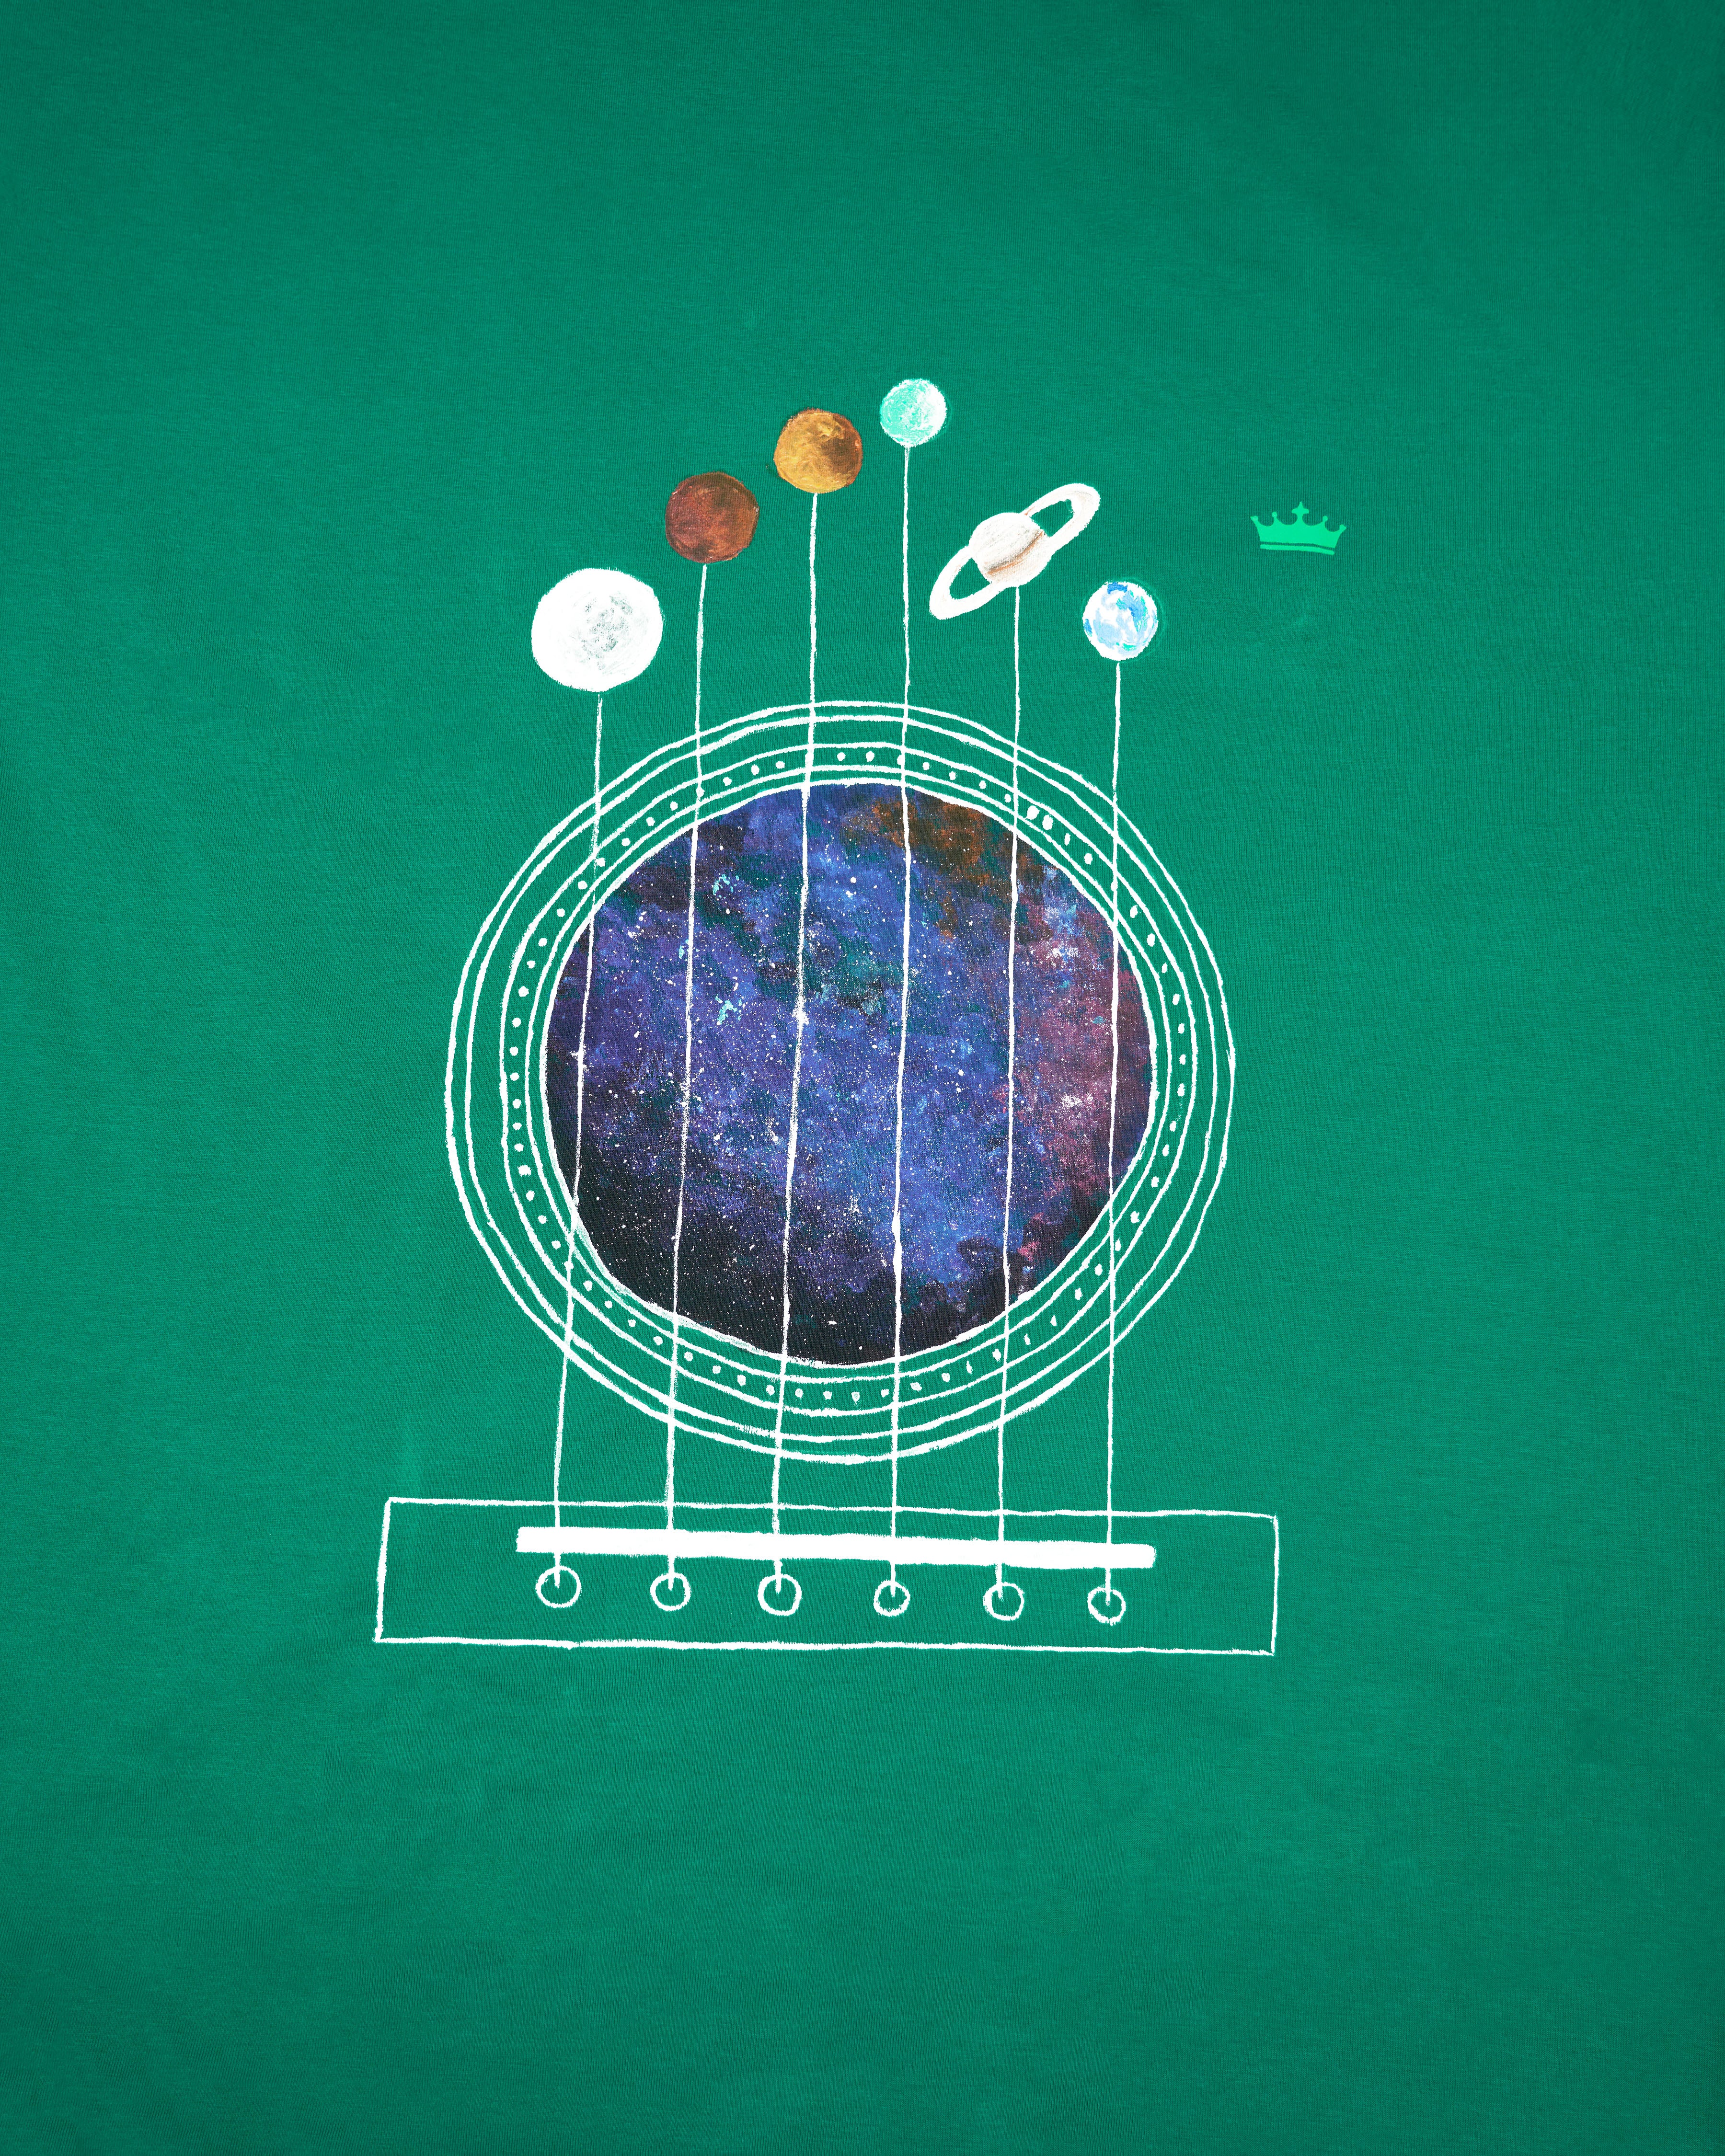 Tropical Green with Planets Hand Painted Premium Cotton T-shirt TS005-W012-S, TS005-W012-M, TS005-W012-L, TS005-W012-XL, TS005-W012-XXL